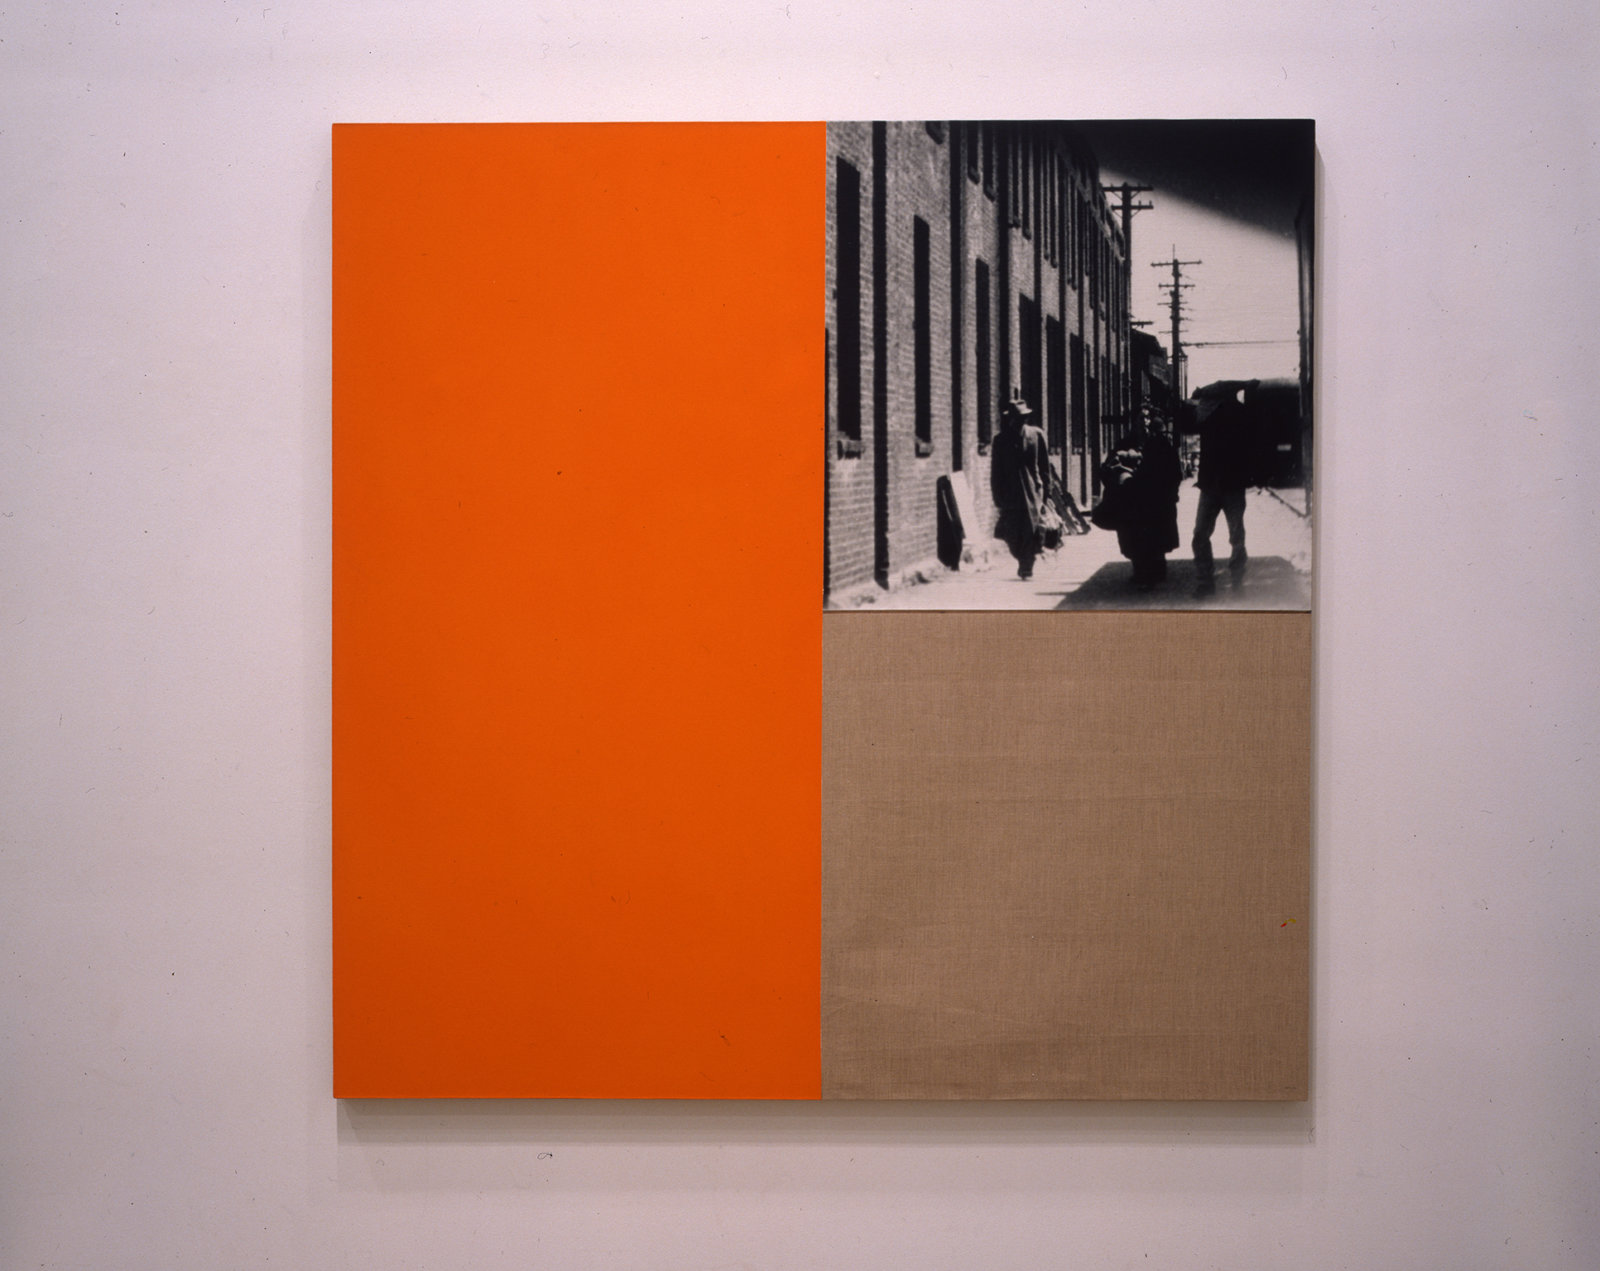 Ian Wallace, Poverty Image with Orange, 1987, photolaminate and acrylic on canvas, 60 x 60 in. (152 x 152 cm)